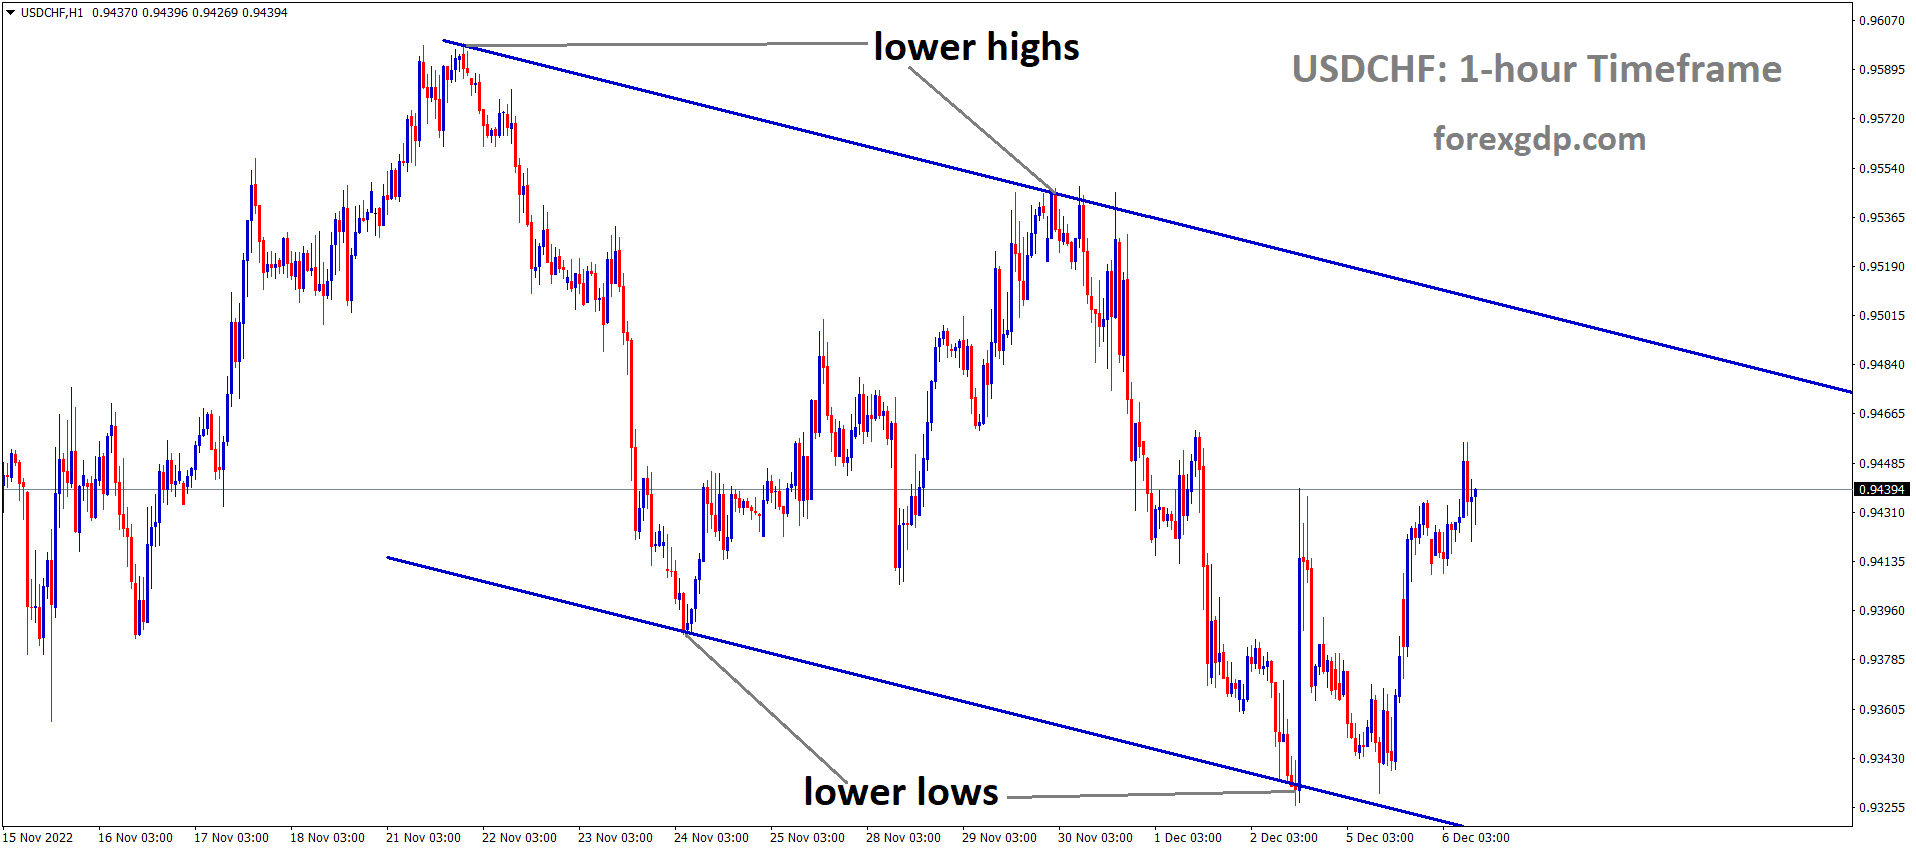 USDCHF is moving in the Descending channel and the market has rebounded from the lower low area of the channel